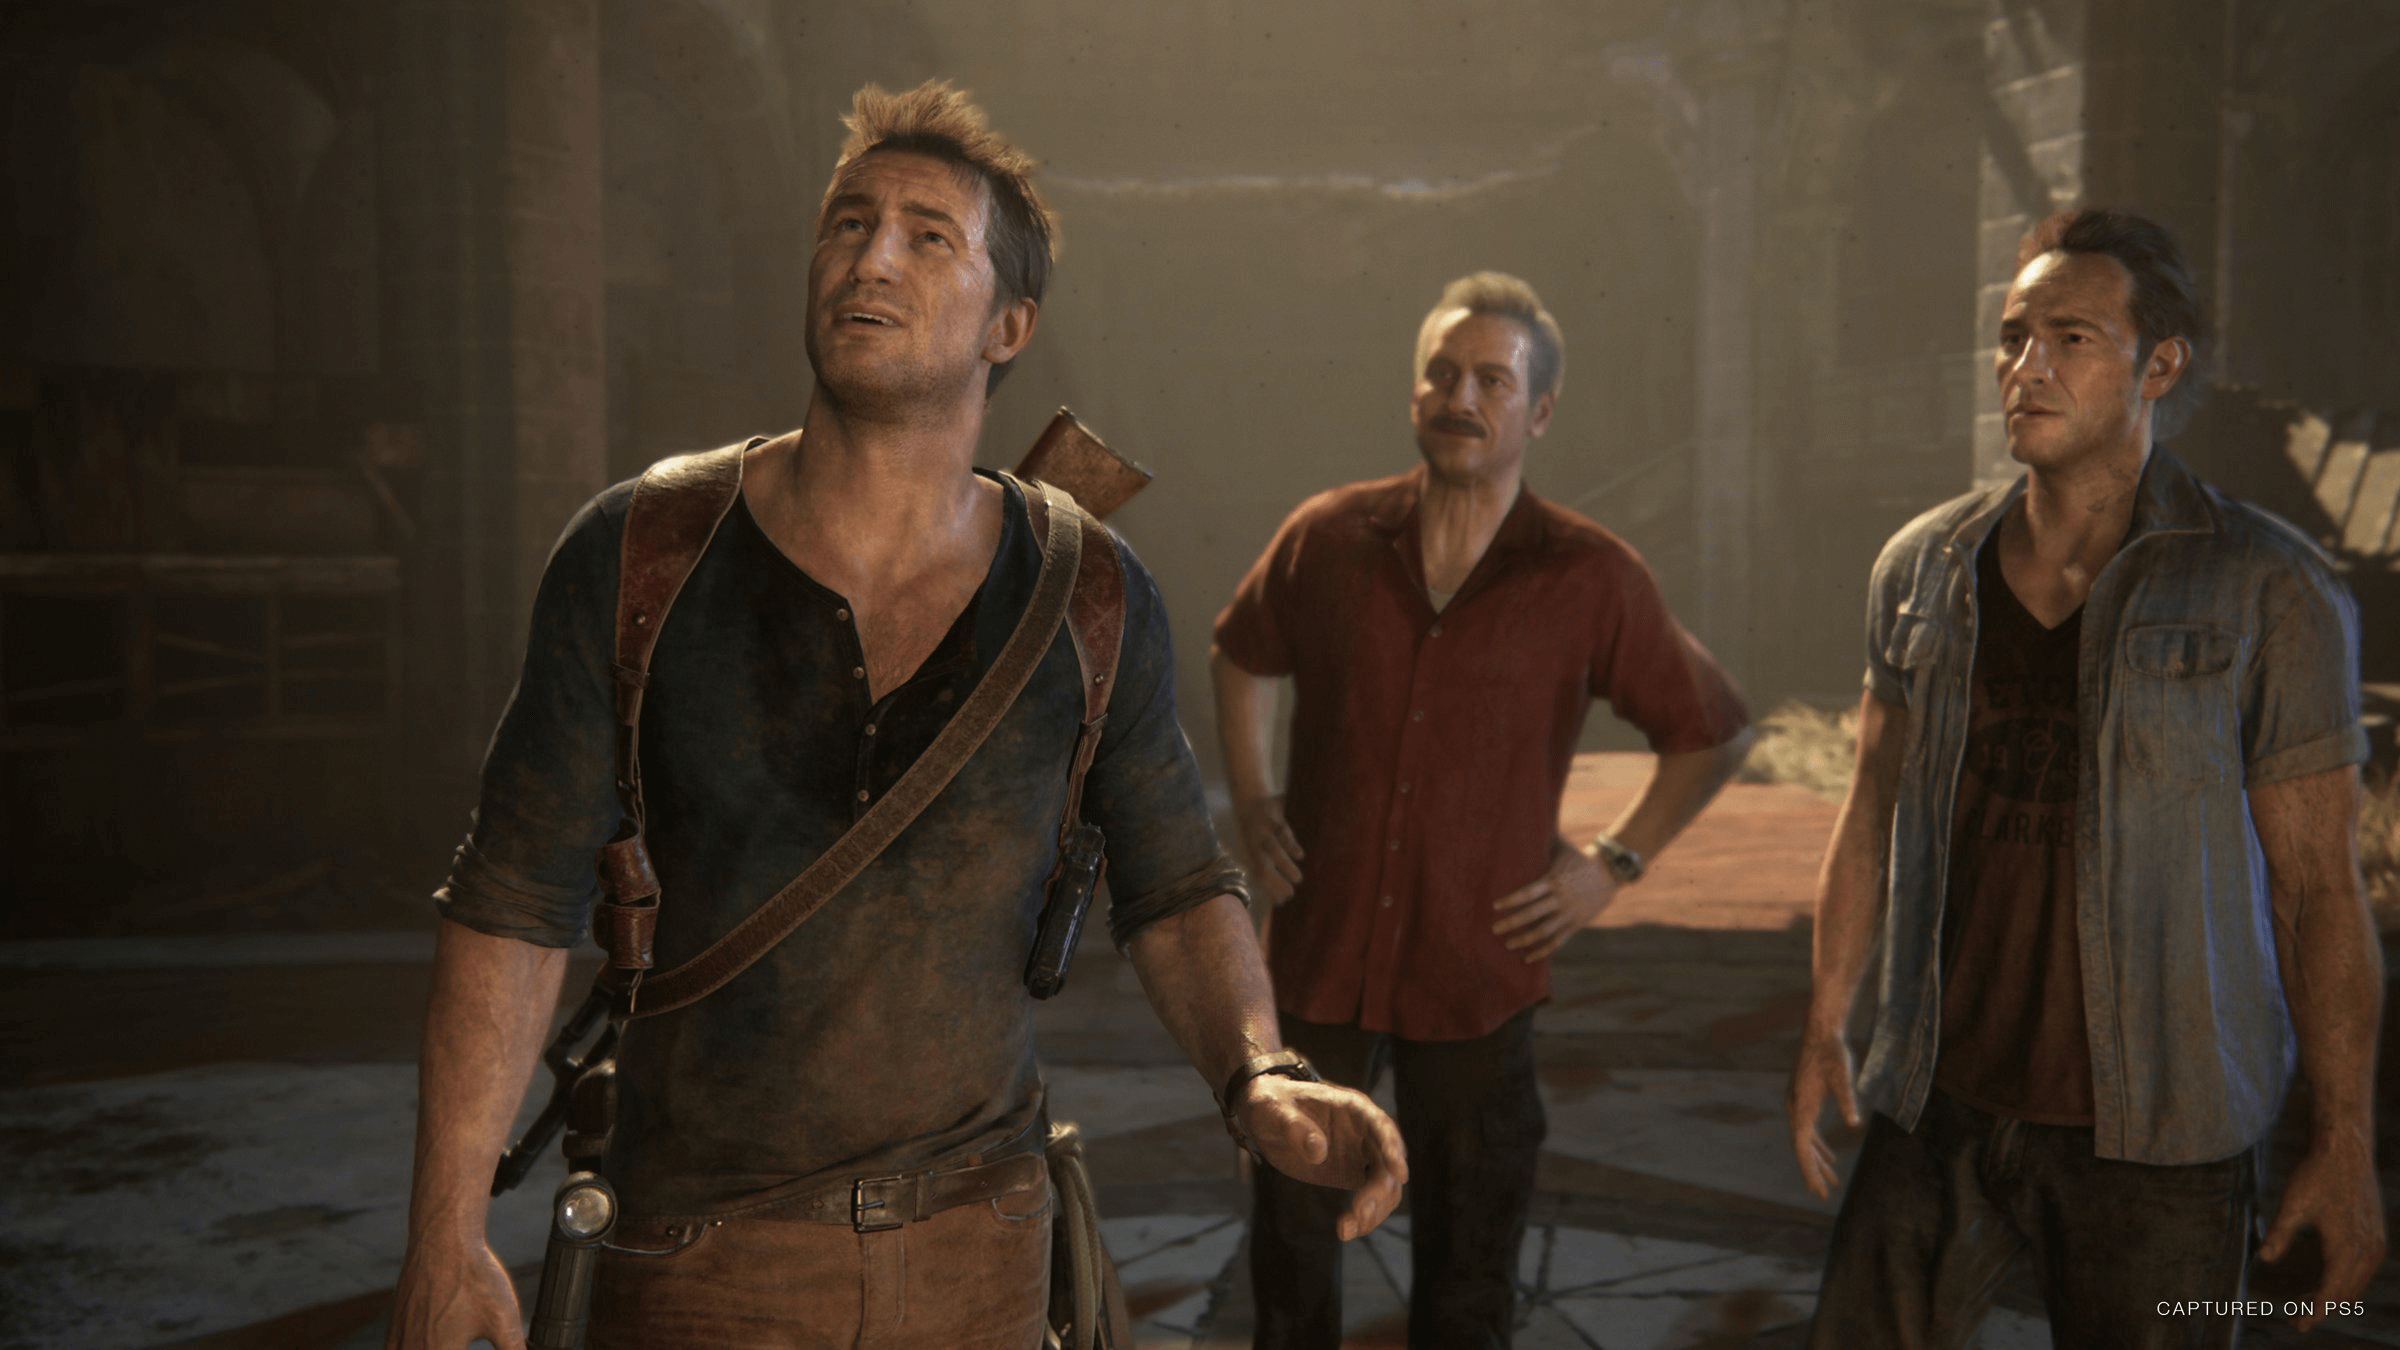 Uncharted 2 movie potential release date, cast and more